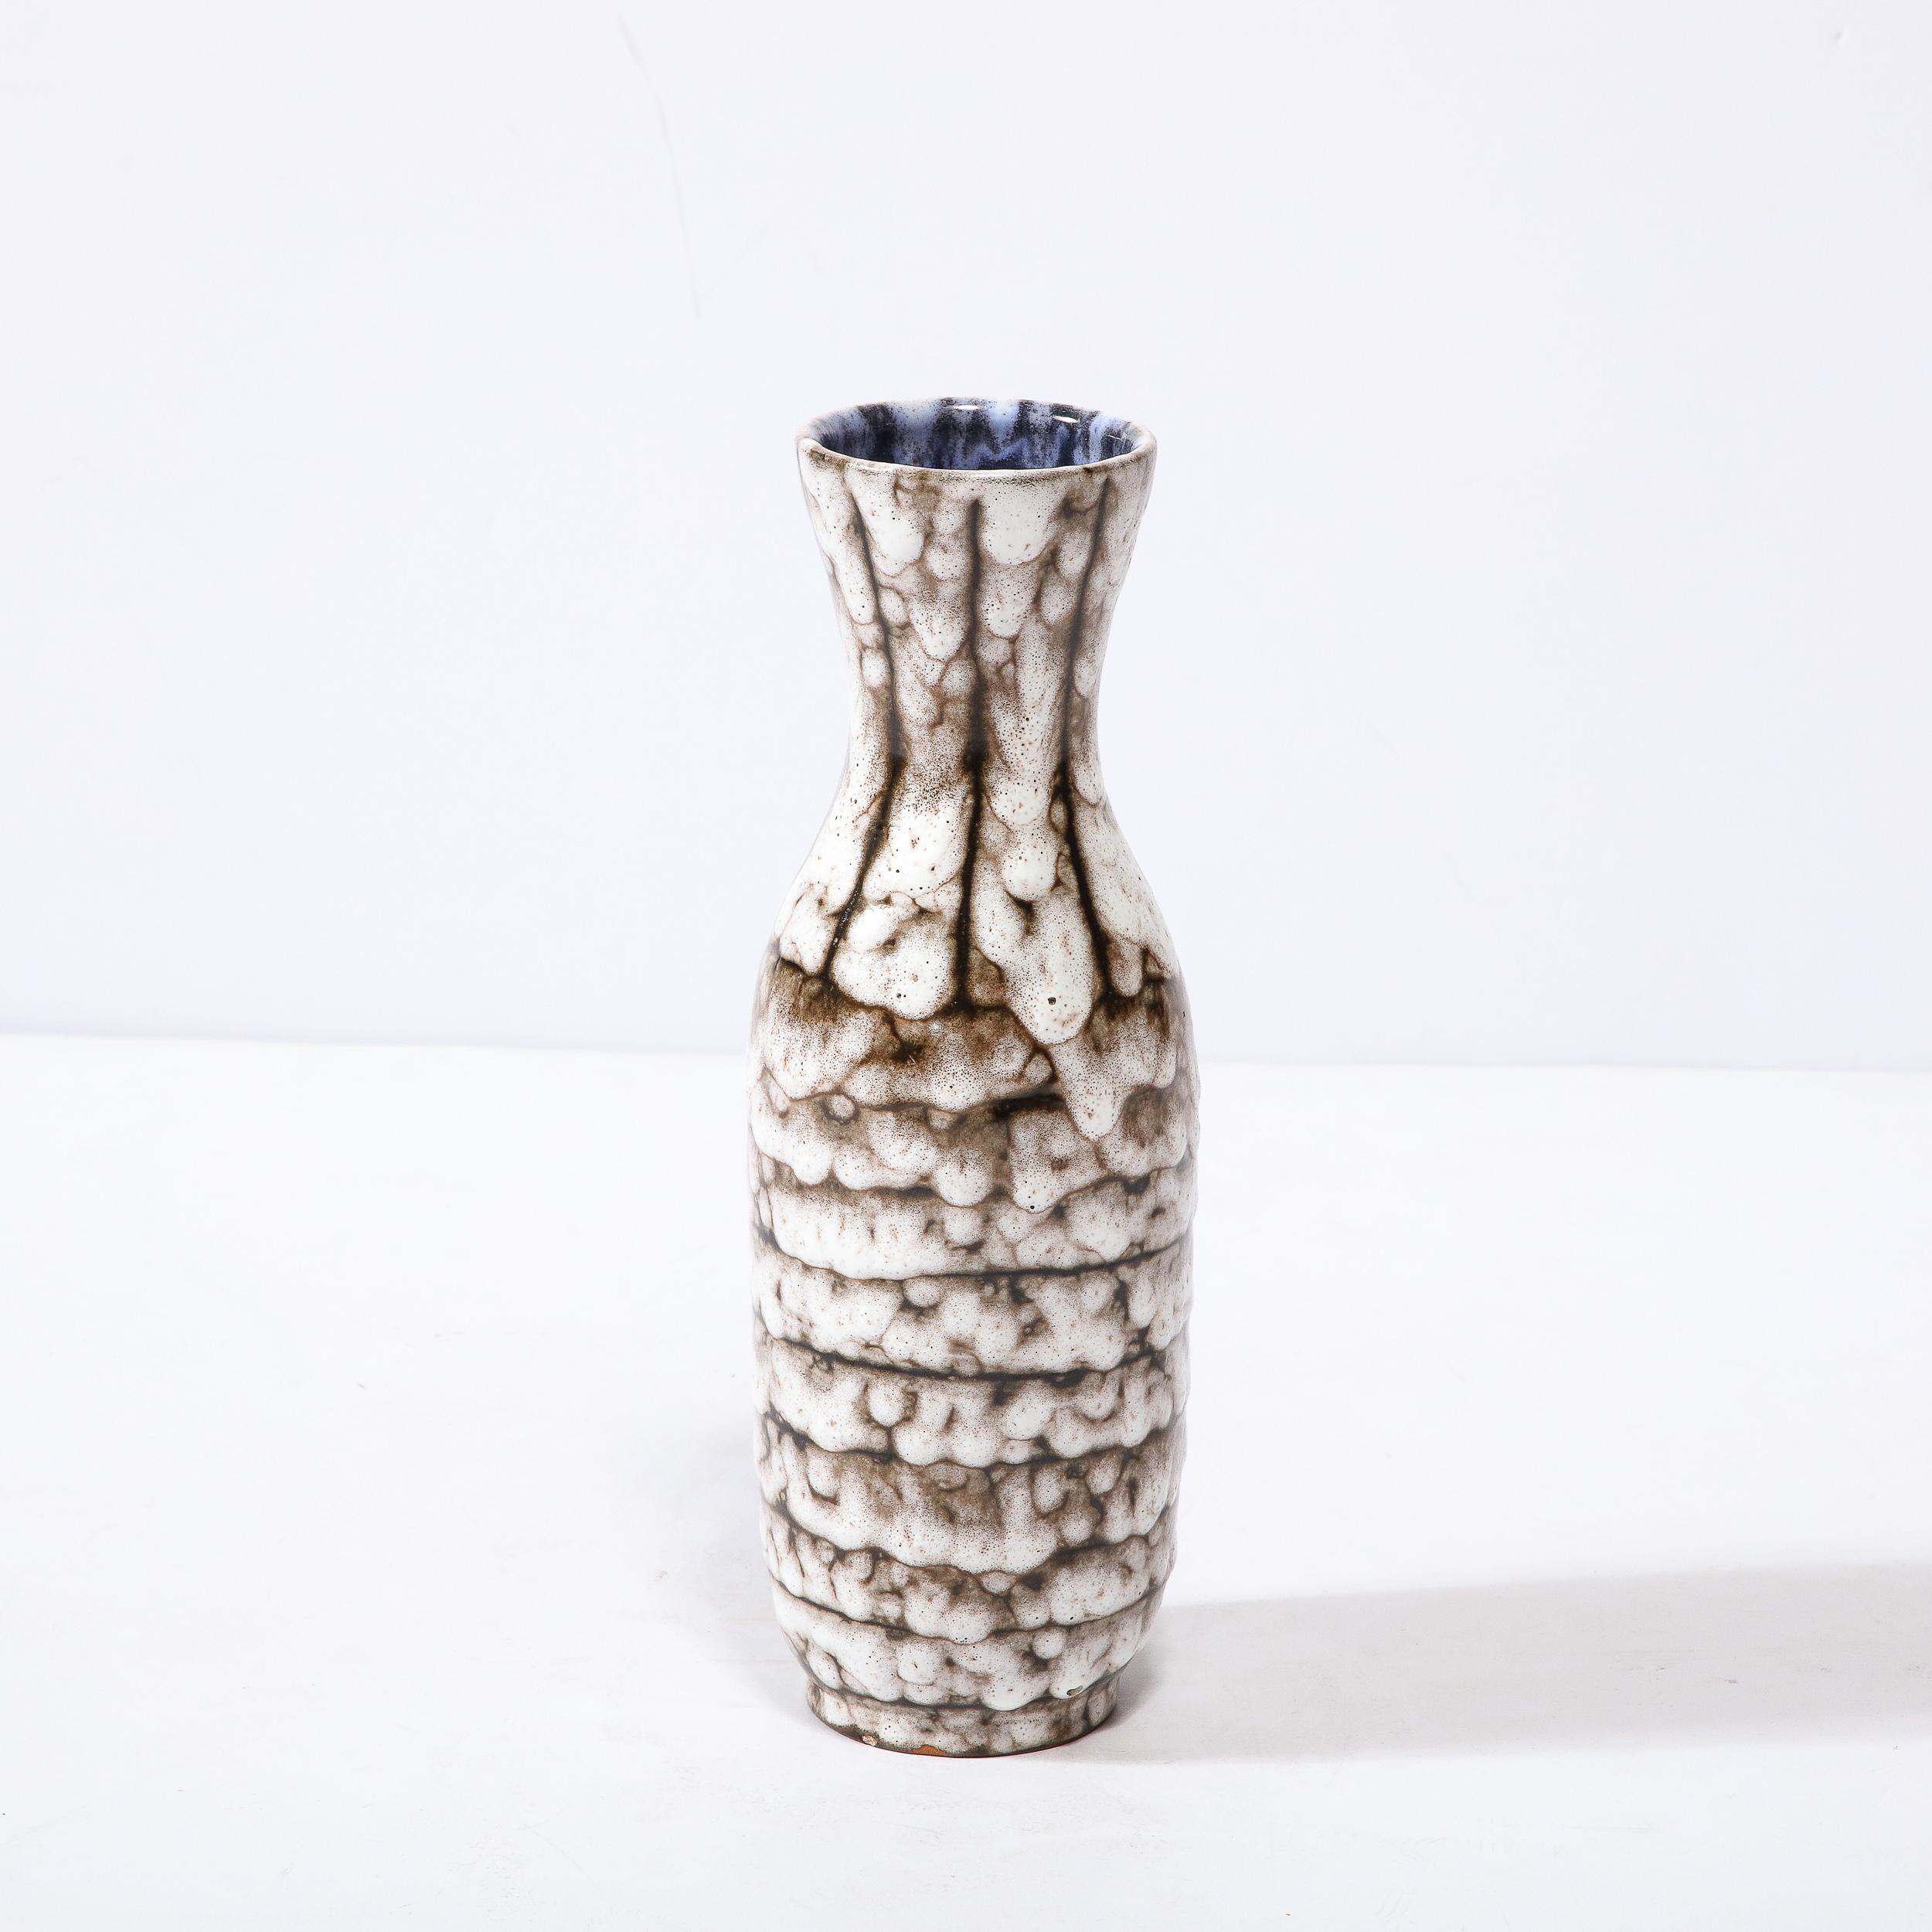 This Mid-Century Modernist Ceramic Vase With Banded Detailing is a beautiful example of Post War European Ceramics, realized in Hódmezovasarhely Majolikagyár, Hungary circa 1960. With a Stunning textural finish composed in Cream White and Blackened